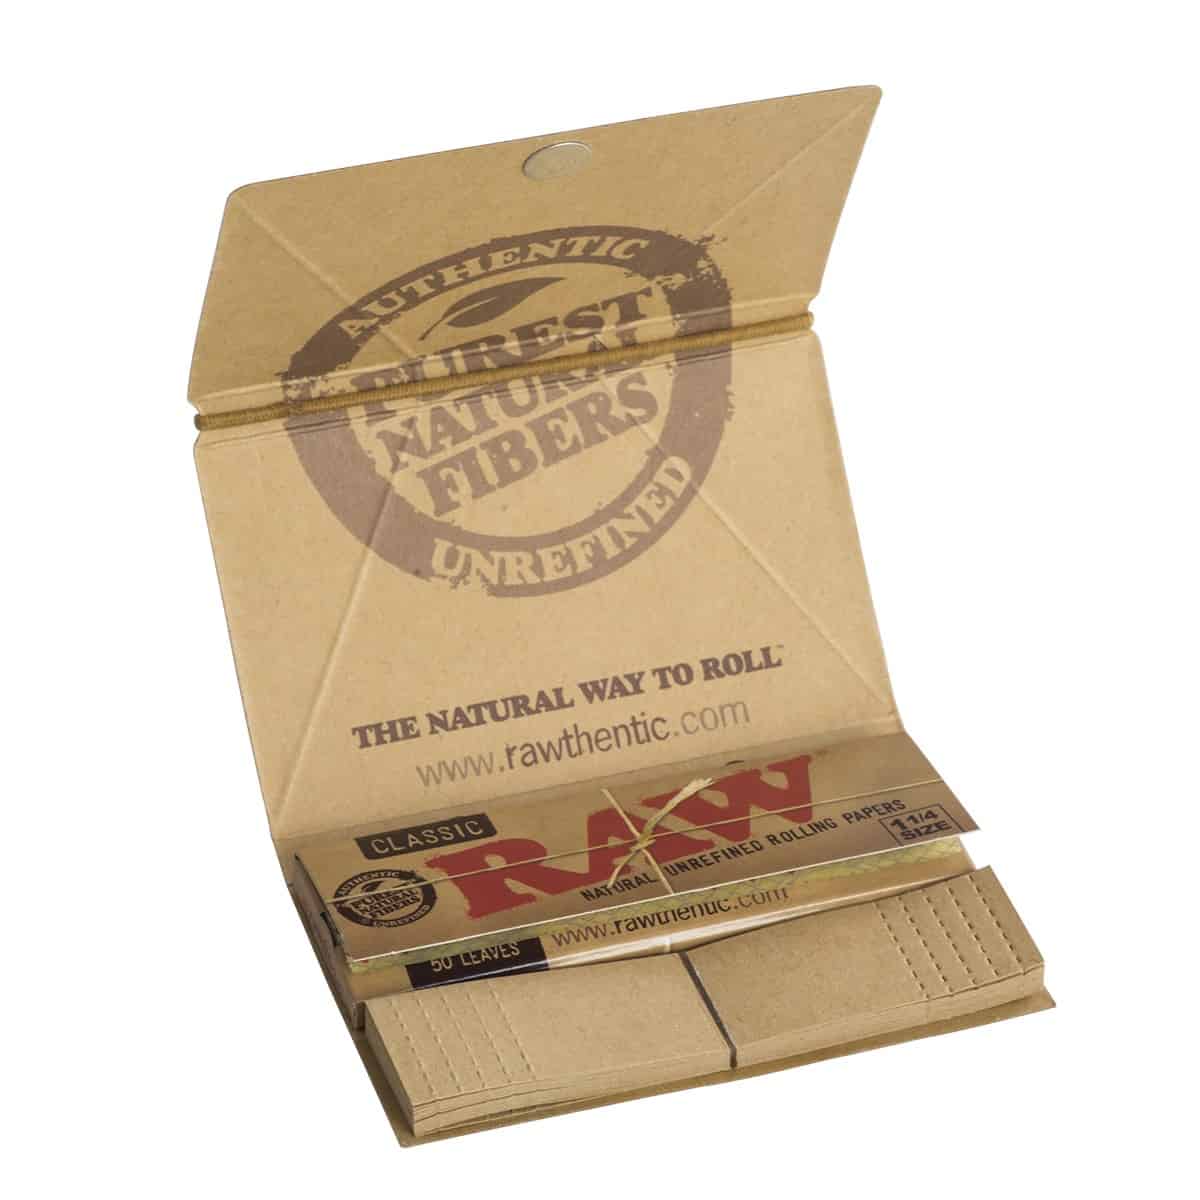 RAW Classic 1 1/4" Rolling Papers